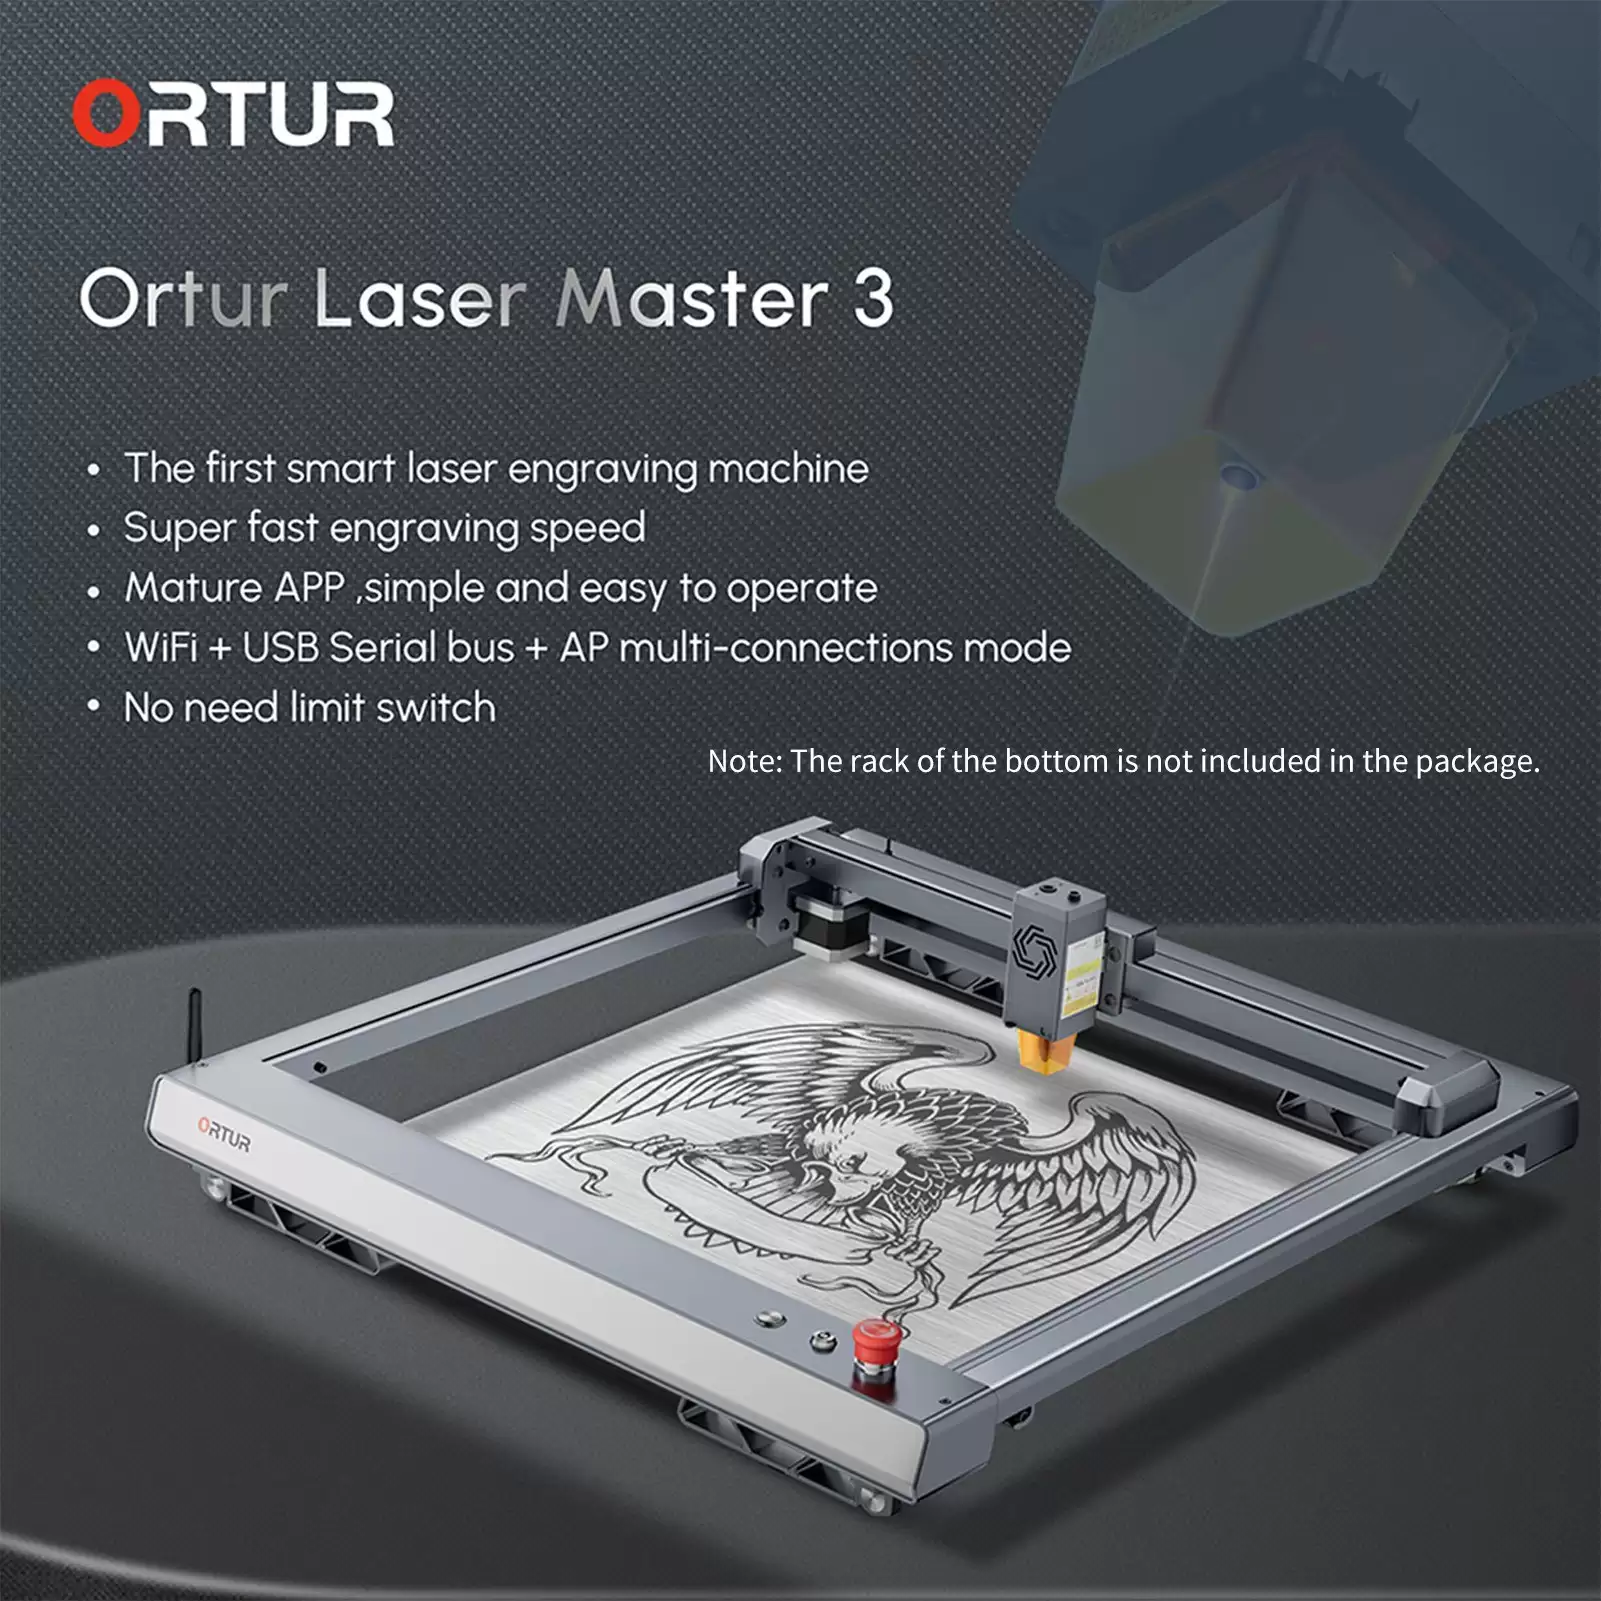 Pay Only $ 379 For Ortur Laser Master 3 10w Laser Engraver + Free Shipping At Cafago